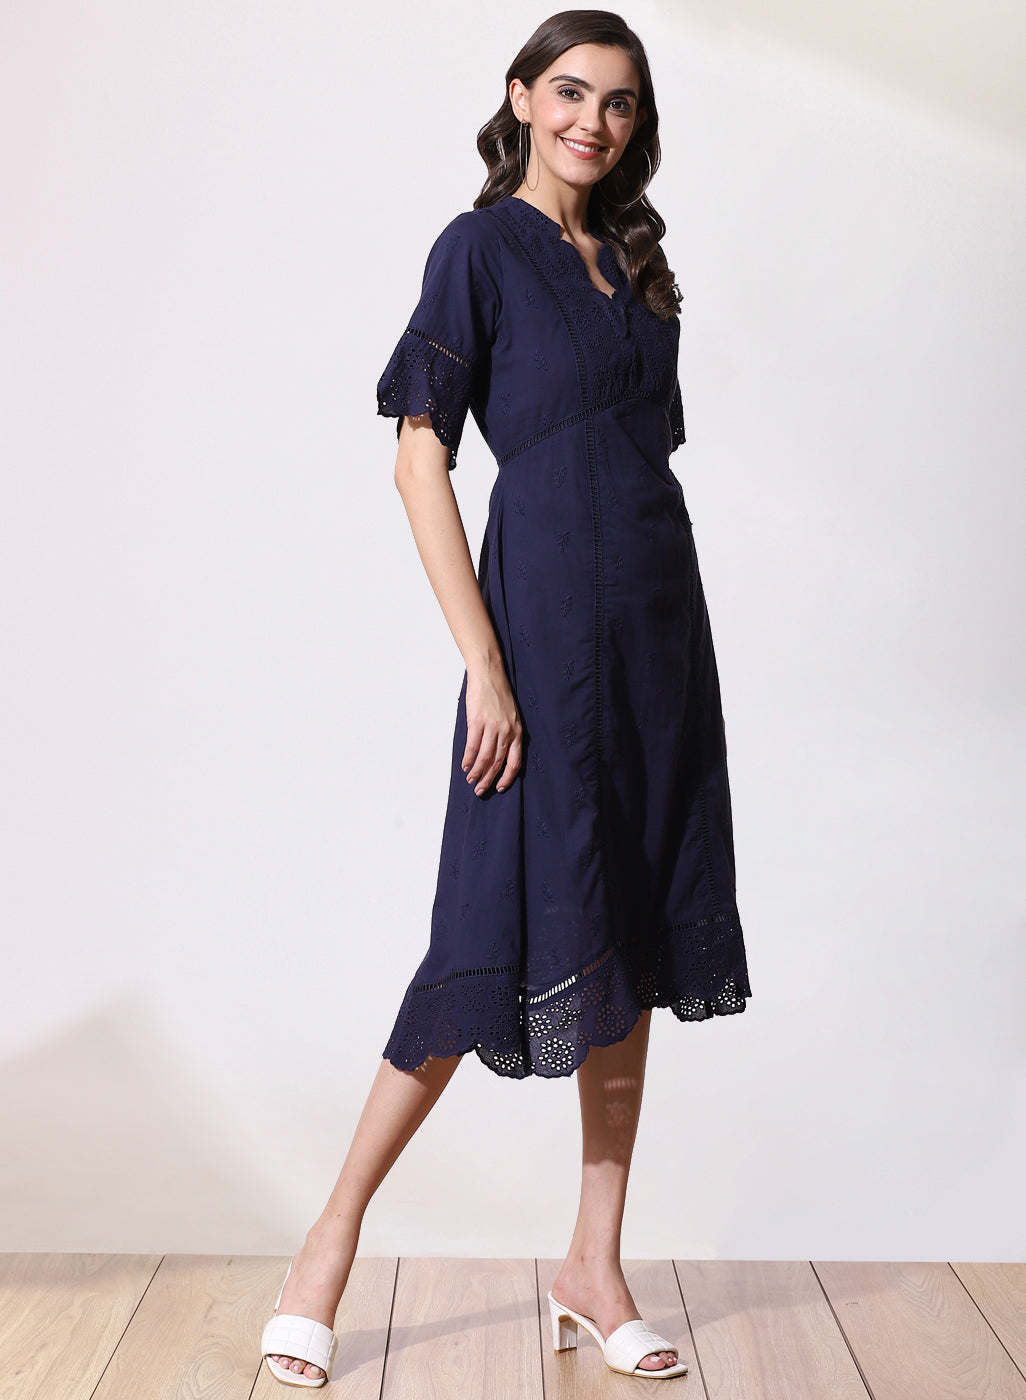 Navy Blue Phool Collection Dress with Lace Details